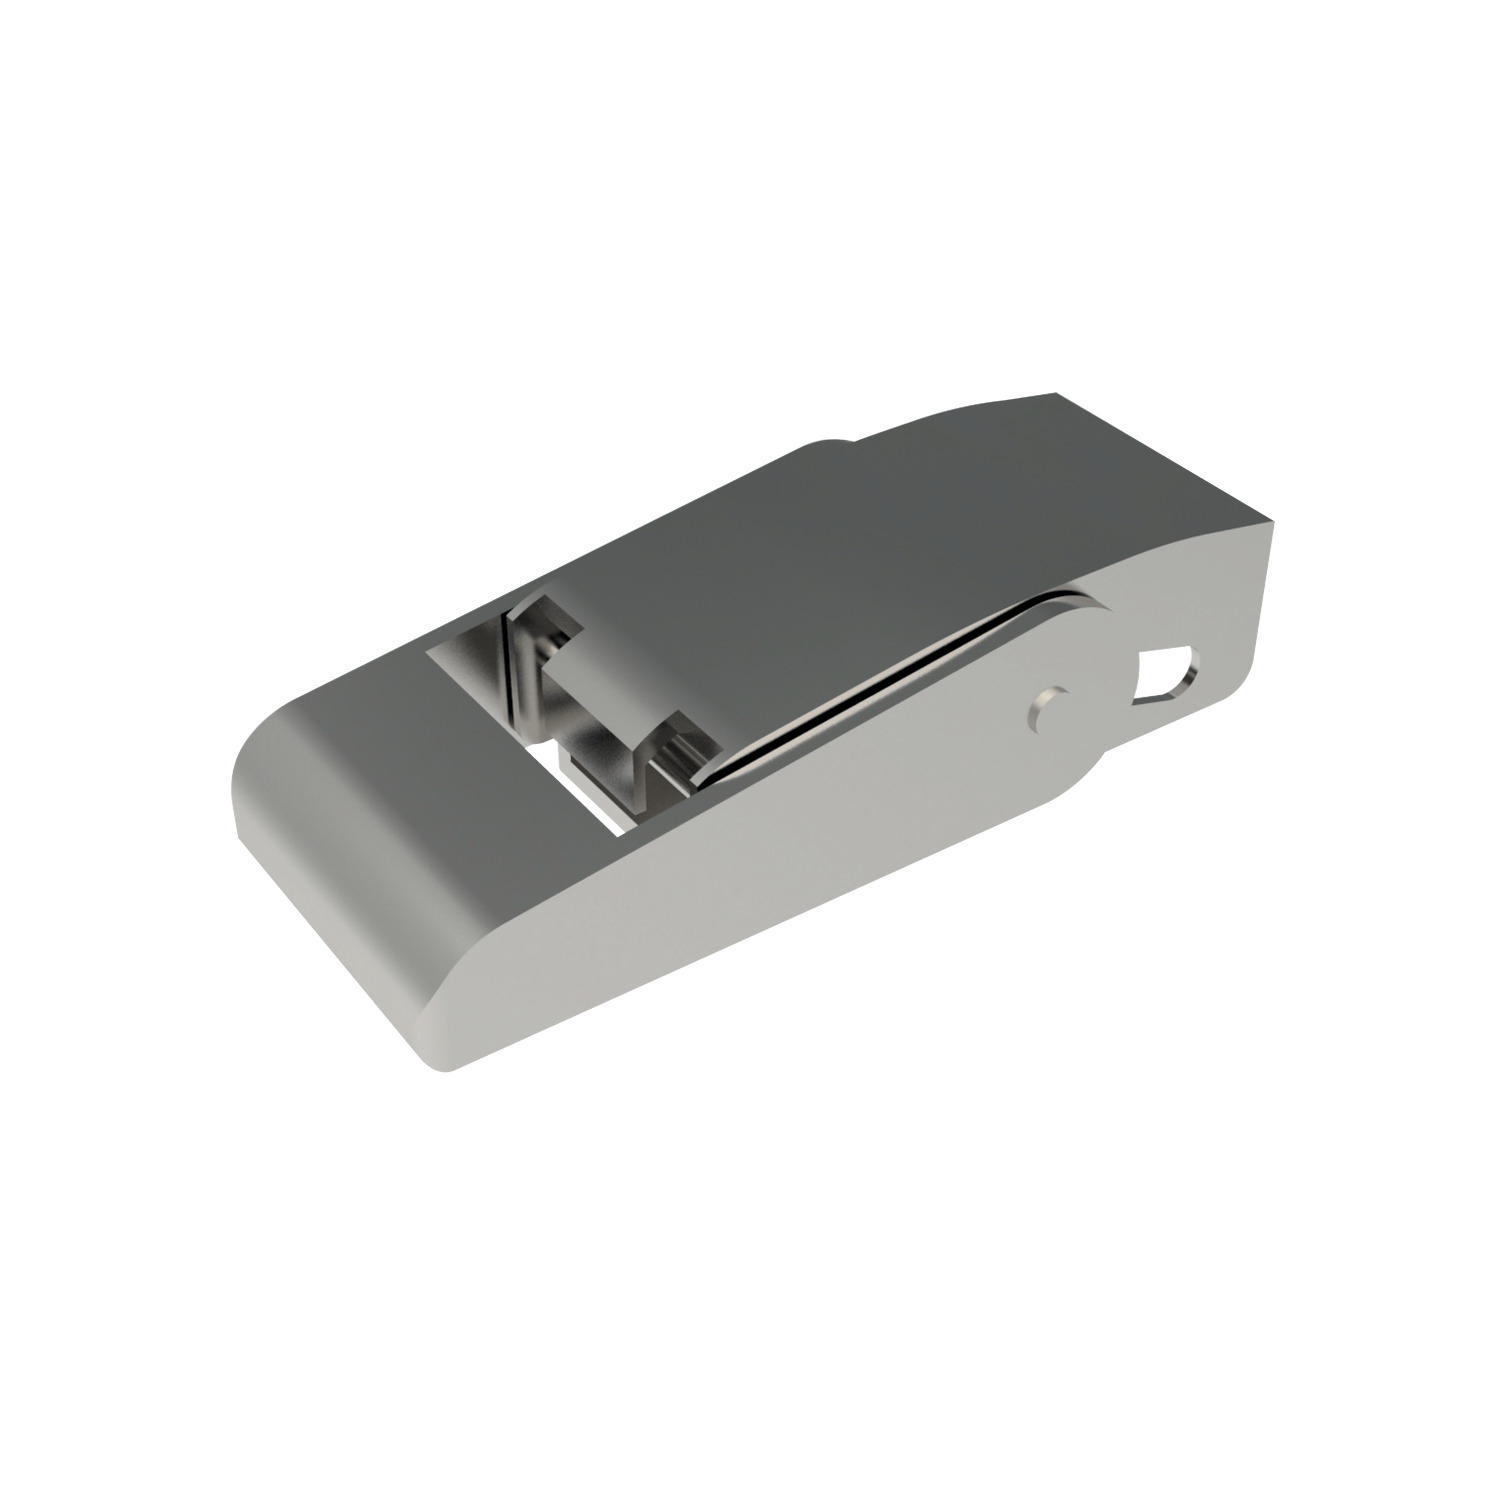 J0300.AC0030 Draw Latches - Spring Loaded Stainless steel